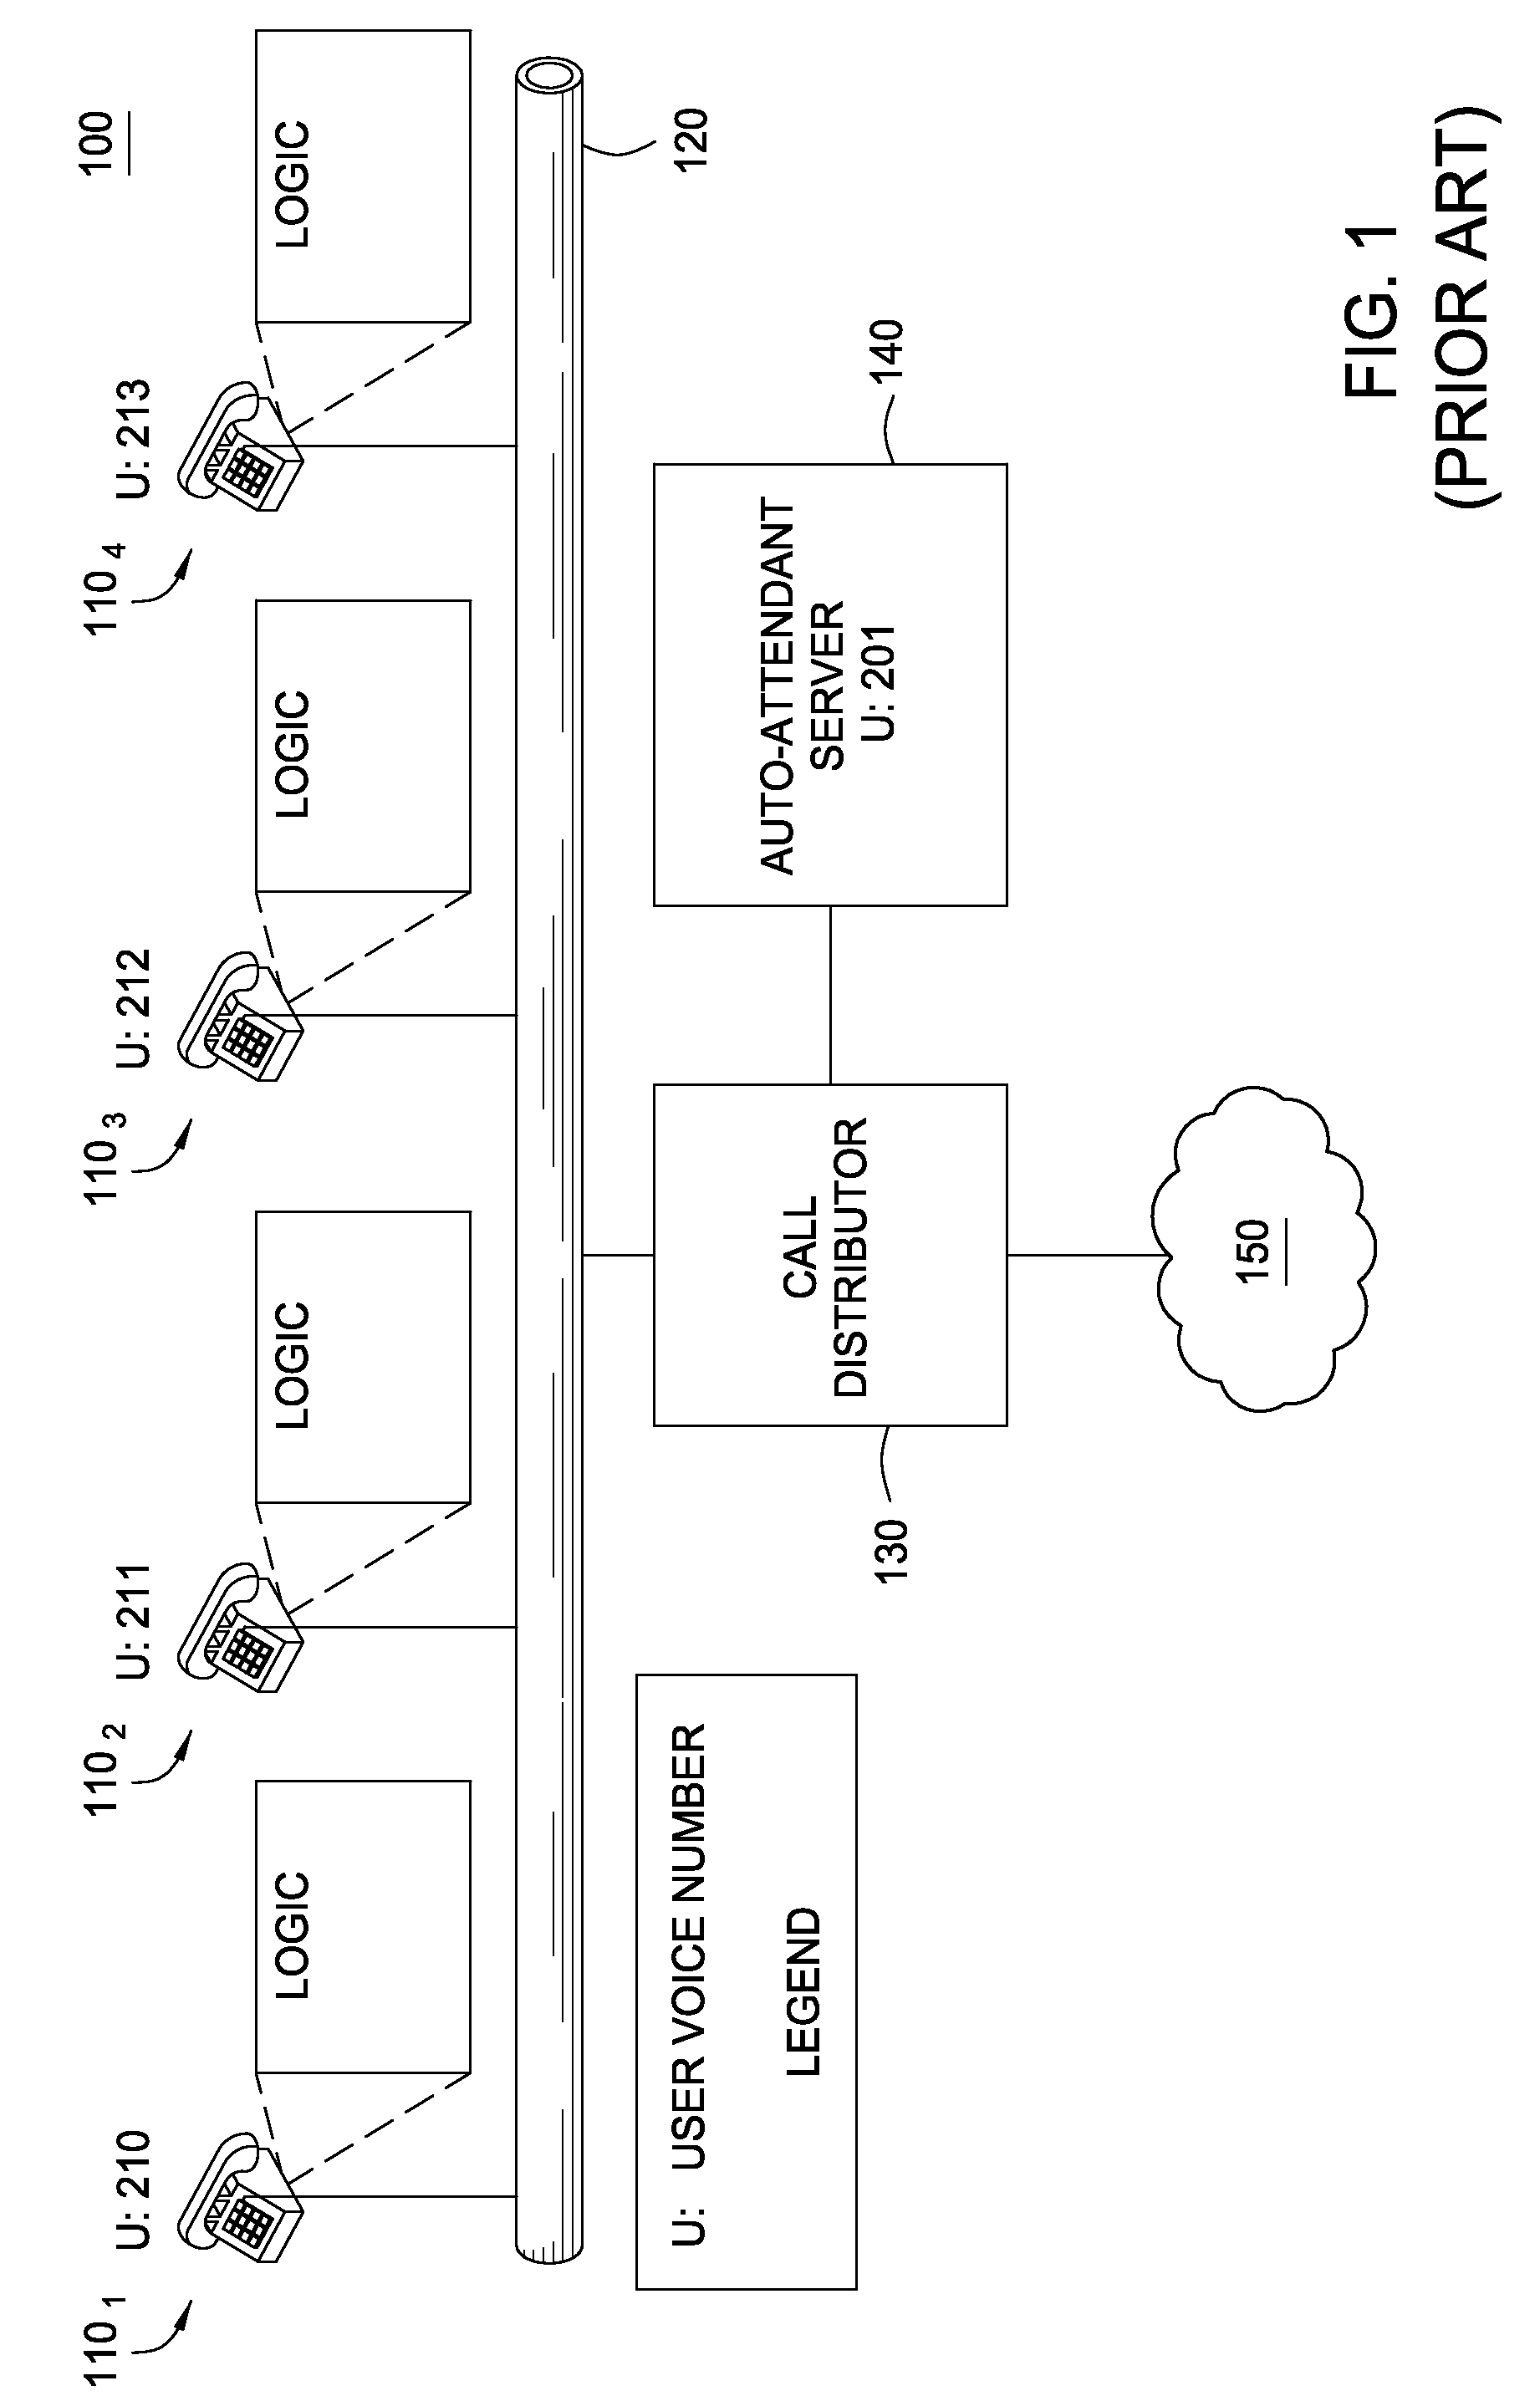 System and method for distributing auto-attendant across user endpoints